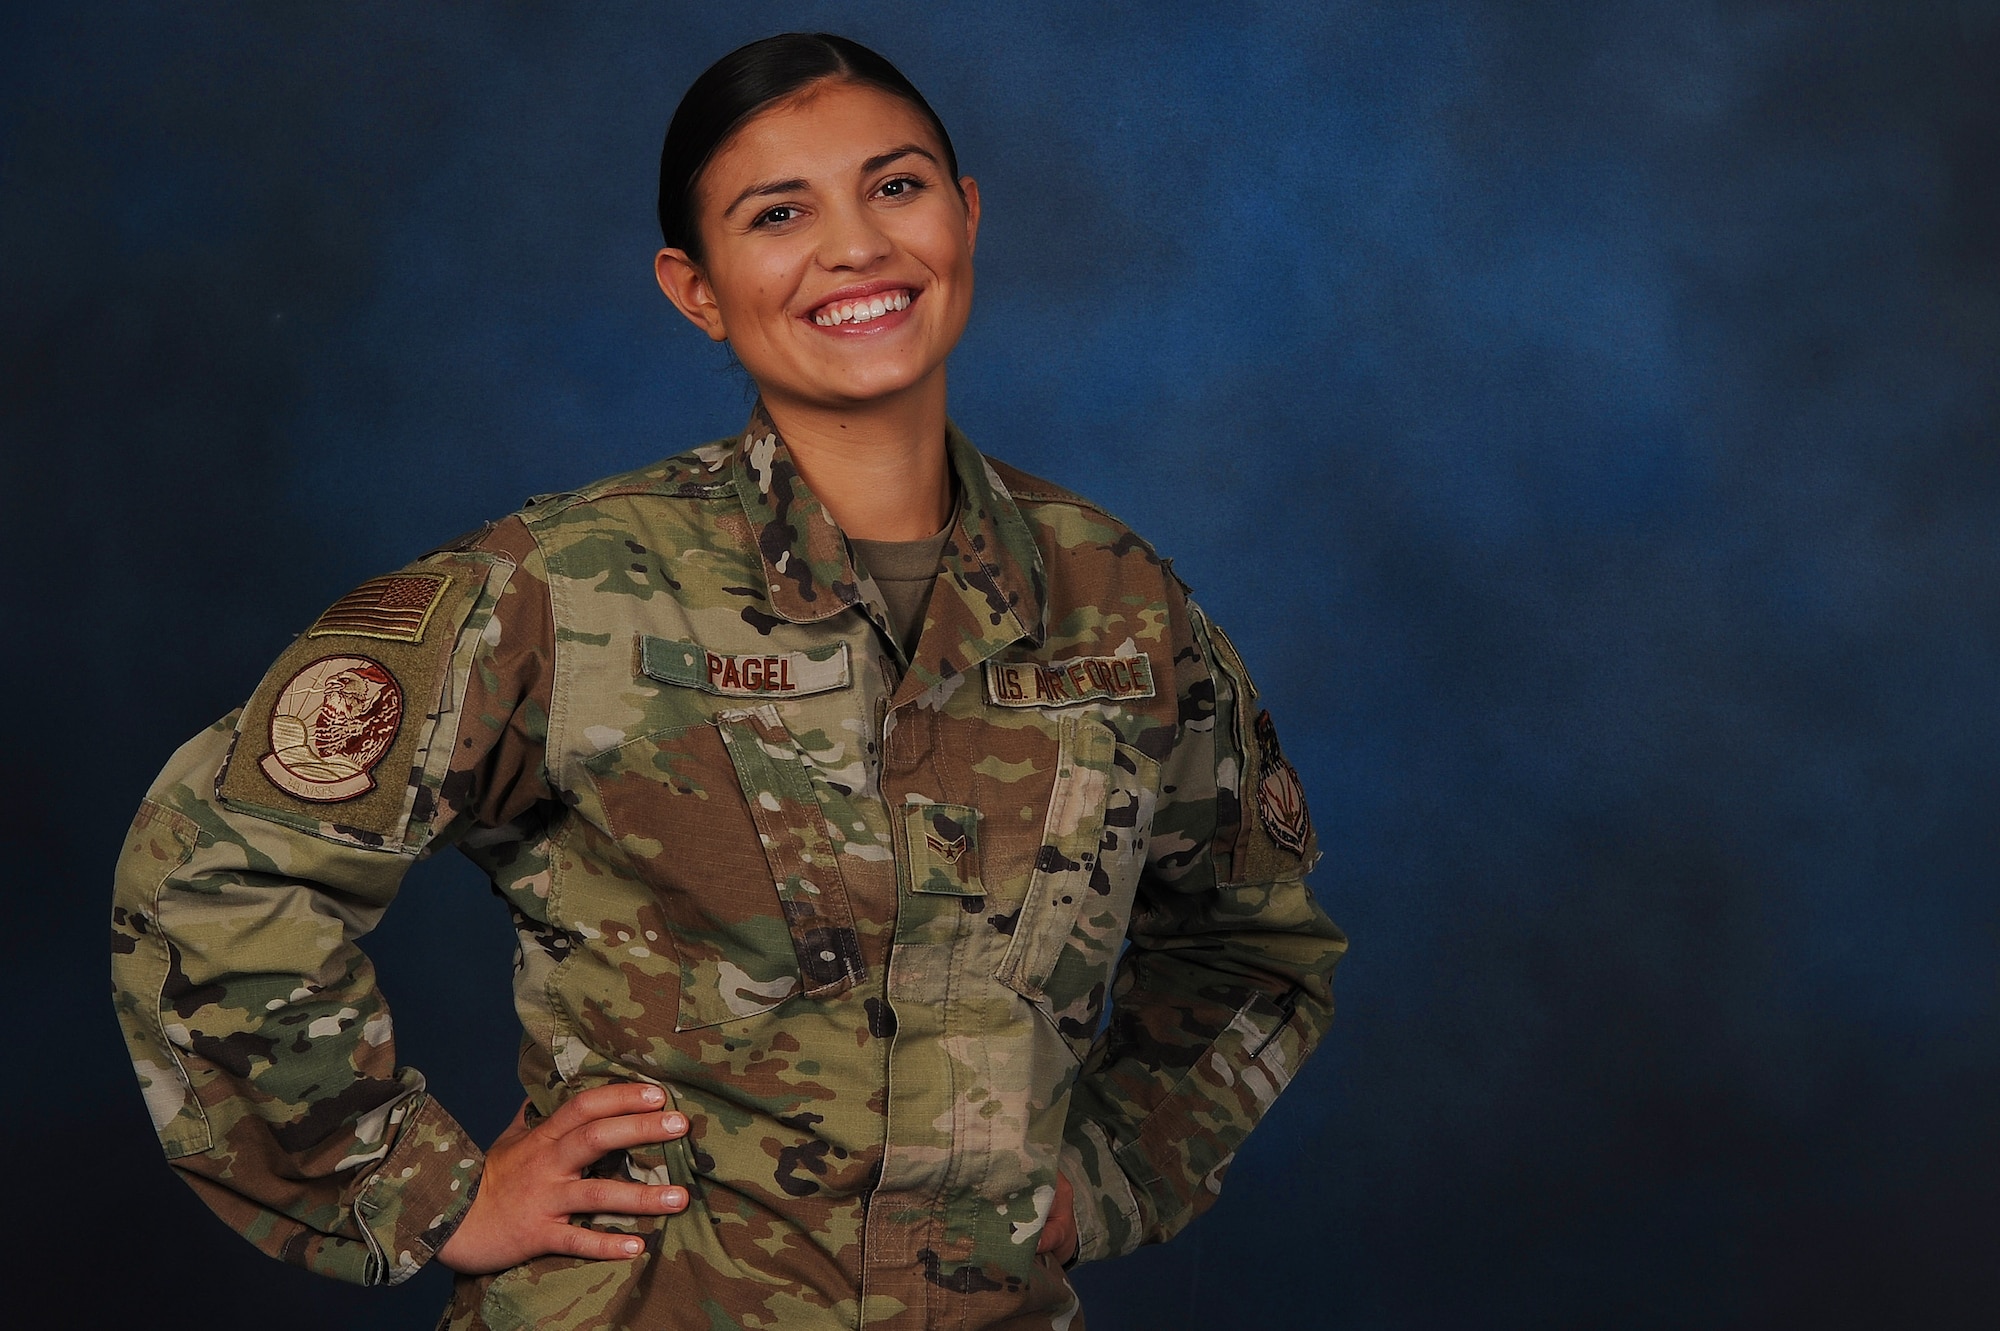 Airman 1st Class Alicia Pagel, 341st Missile Security Forces Squadron scheduler and dispatcher, poses for a photo Oct. 10, 2019, at Malmstrom Air Force Base, Mont.